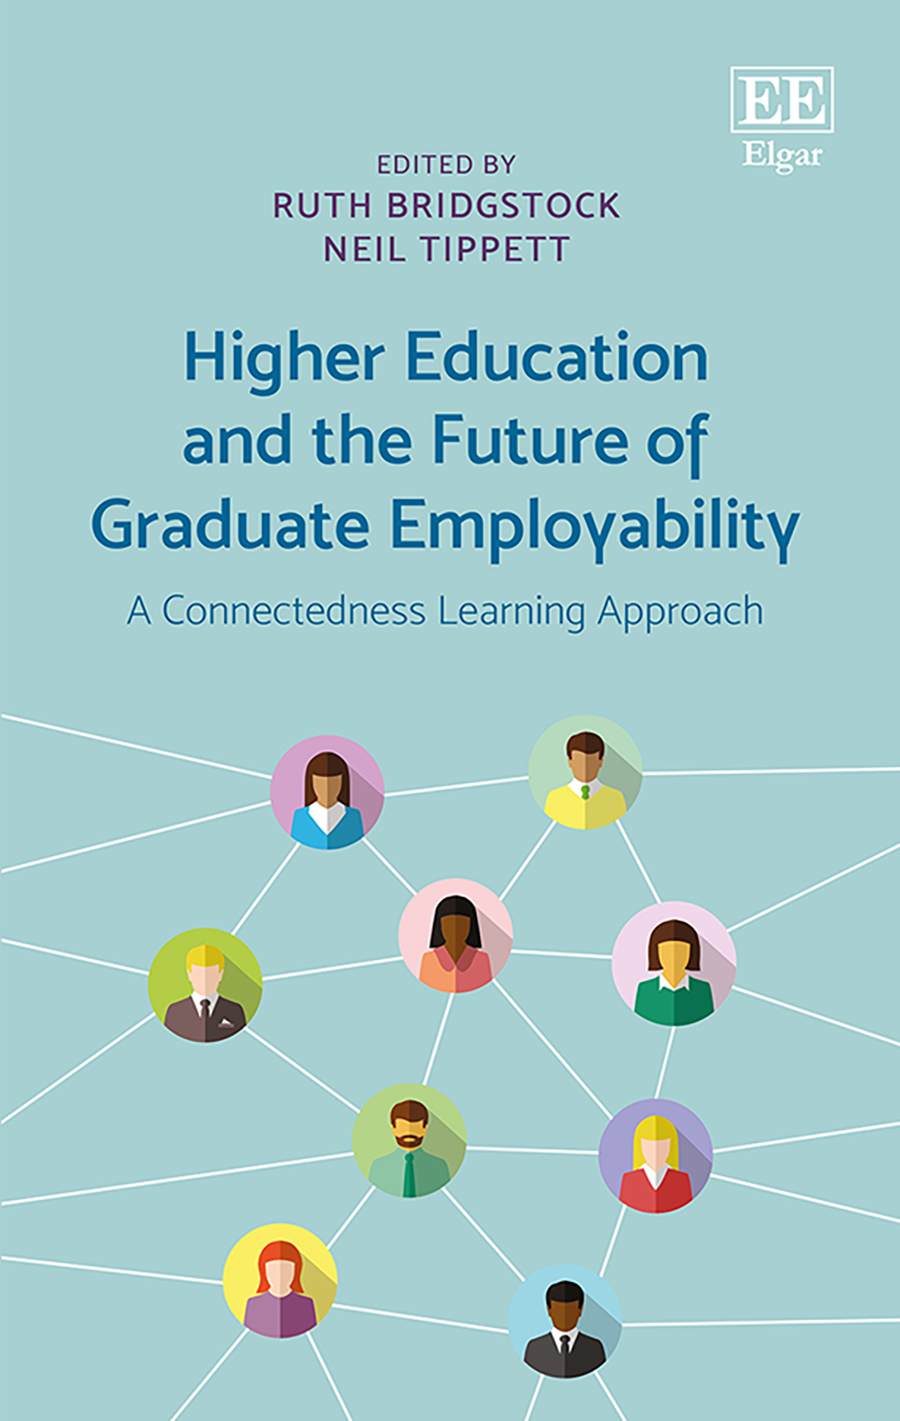 Higher Education and the Future of Graduate Employability